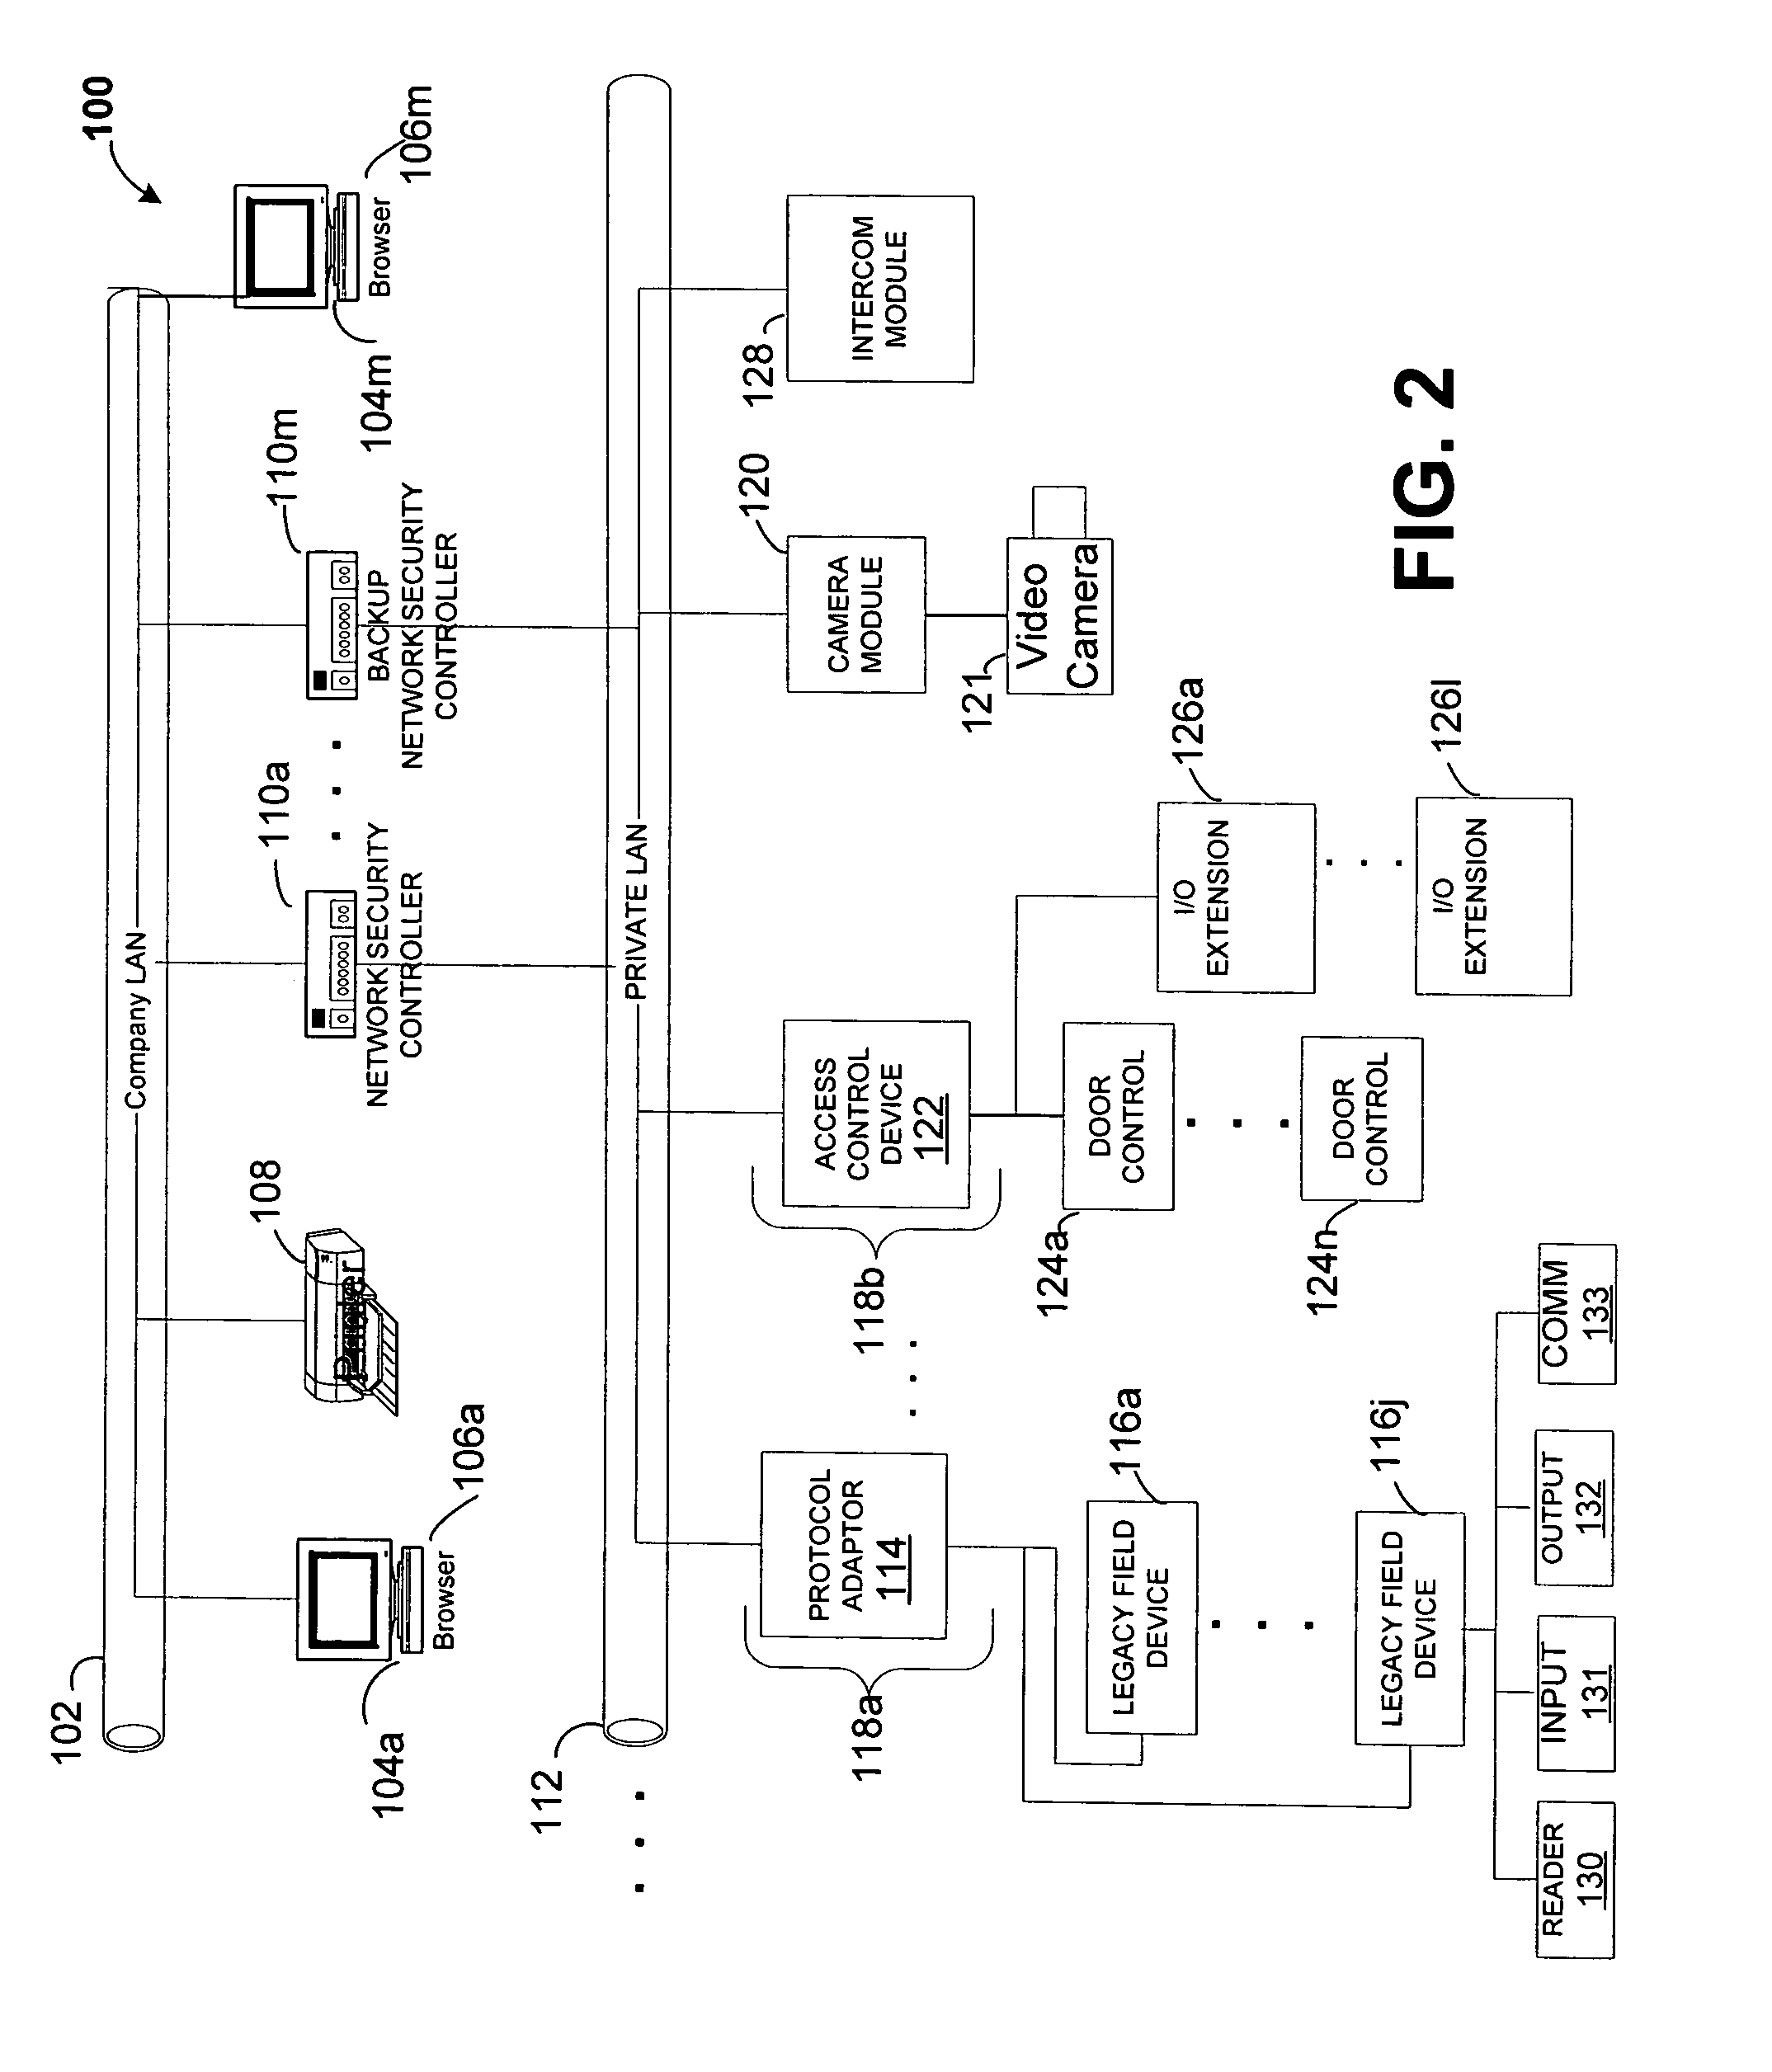 Integrated security system having network enabled access control and interface devices